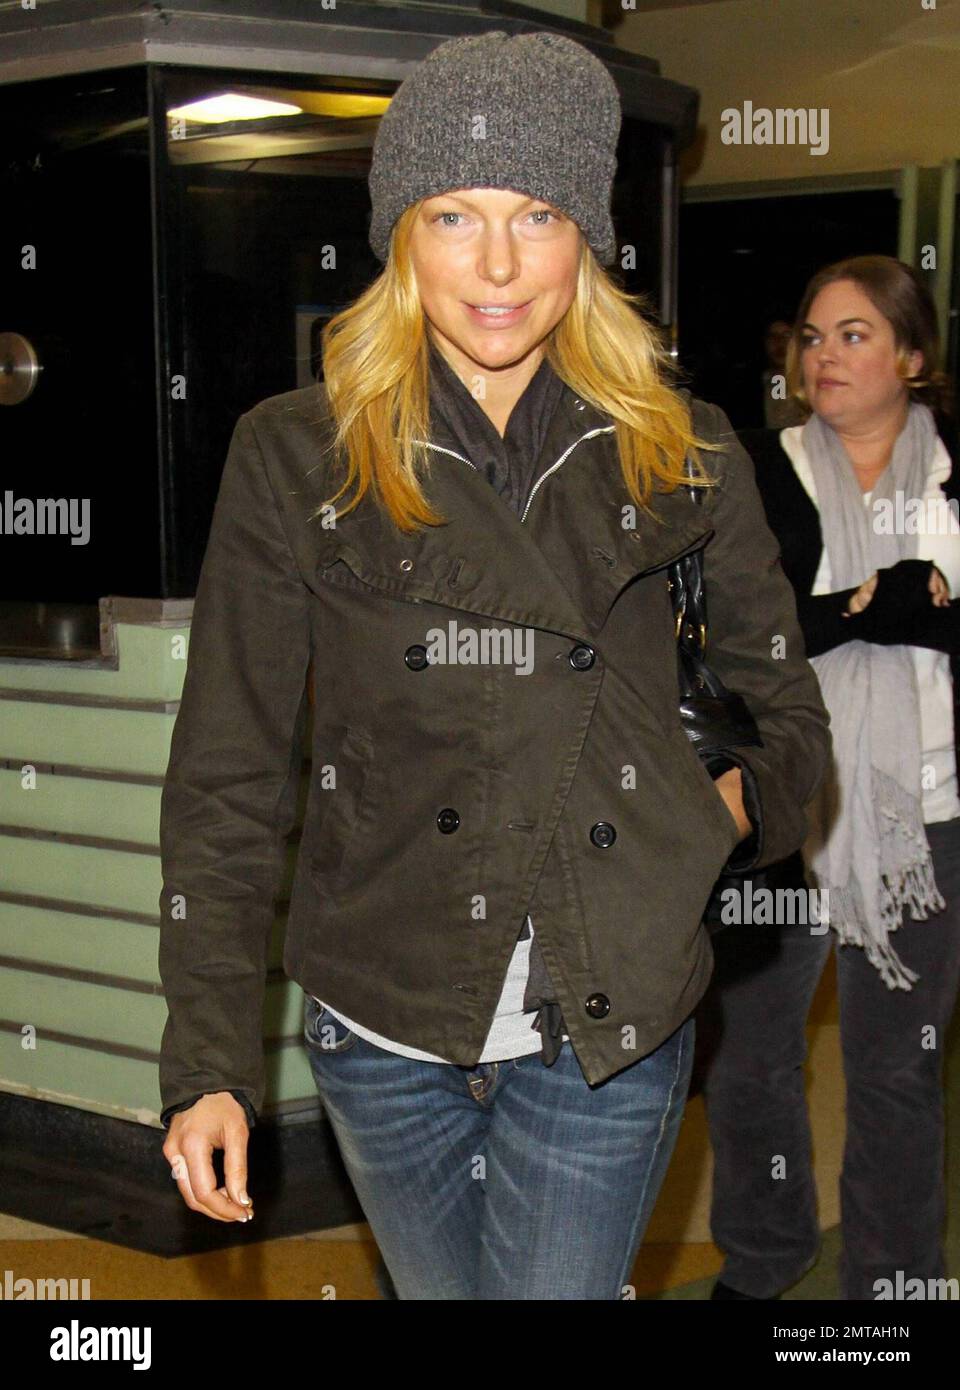 Laura Prepon arrives at the premiere of 'Peach Plum Pear' held at Regent Showcase Cinema during the Hollywood Reel Film Festival.  'Peach Plum Pear' stars Alanna Masterson, sister of 'That '70s Show' actor Danny Masterson. Los Angeles, CA. 12/16/10. Stock Photo